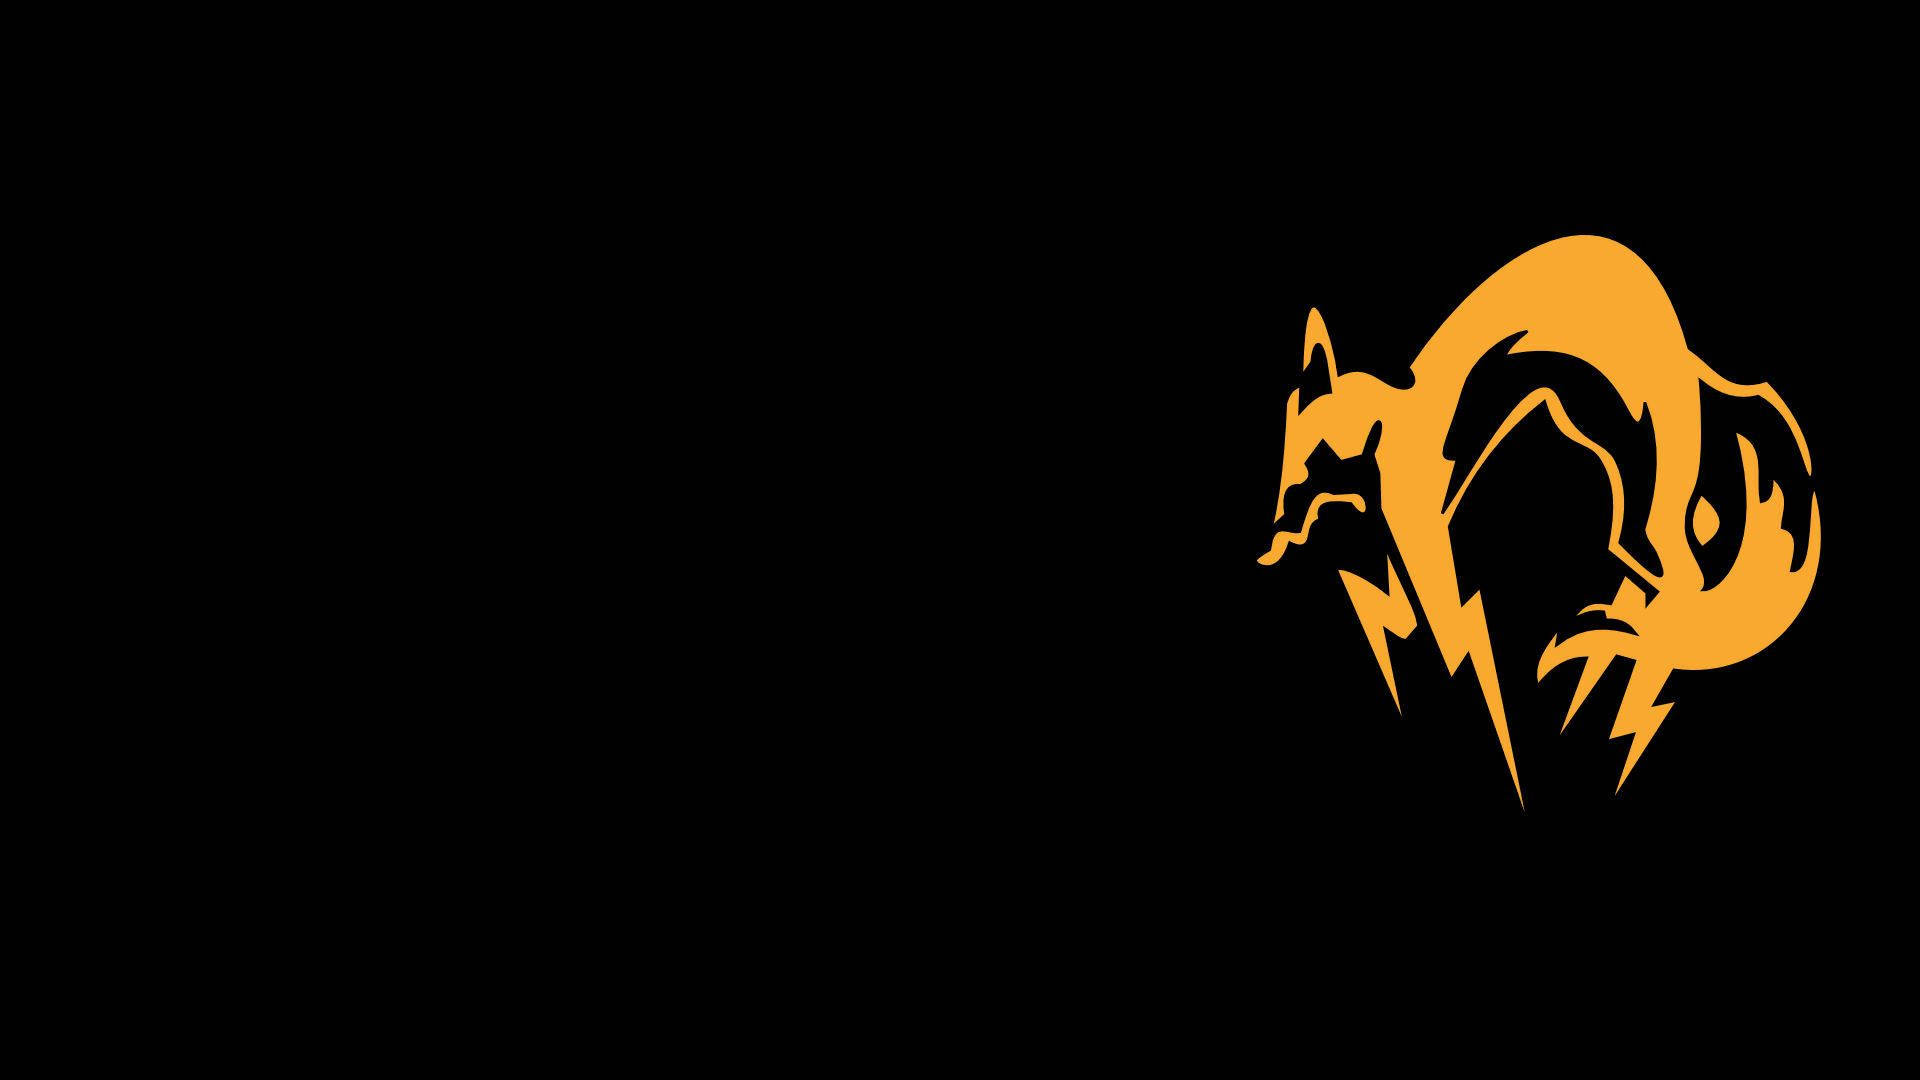 1920X1080 Metal Gear Solid Wallpaper and Background